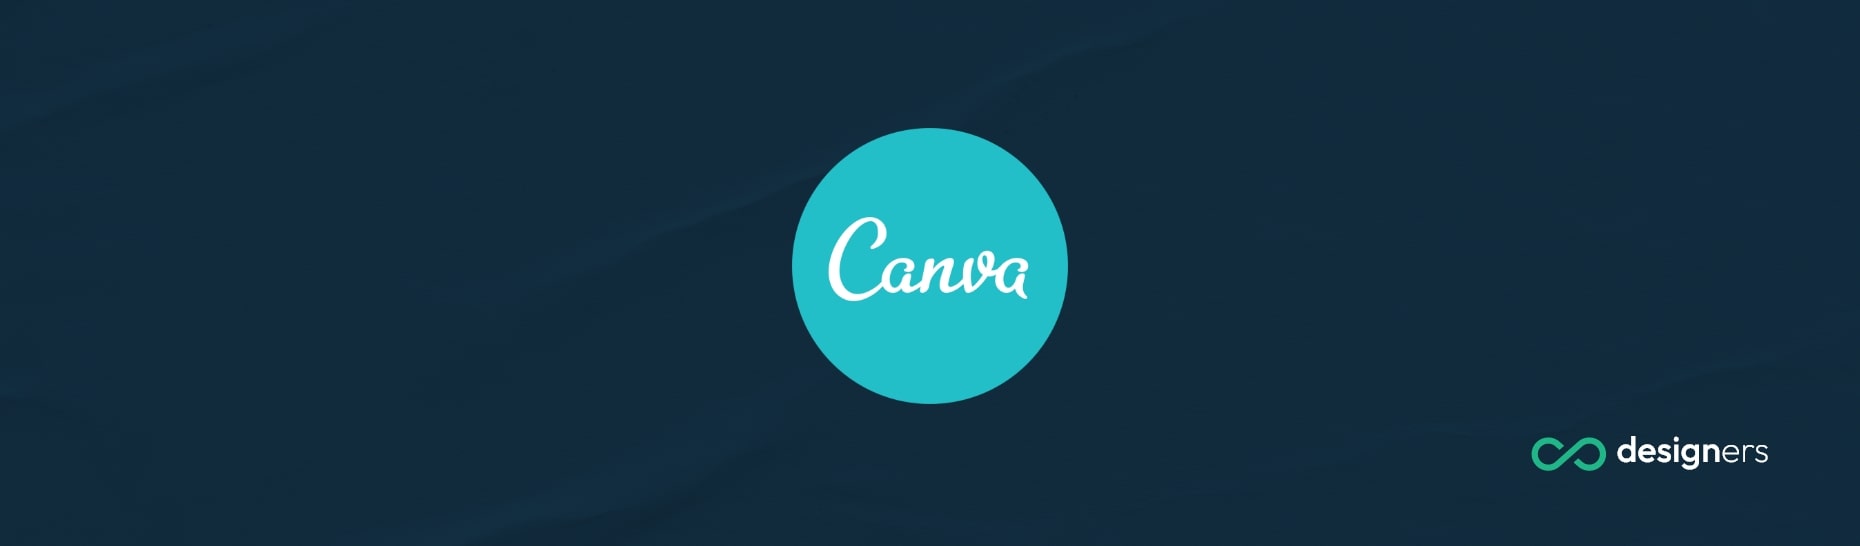 What Font Is Bembo in Canva?